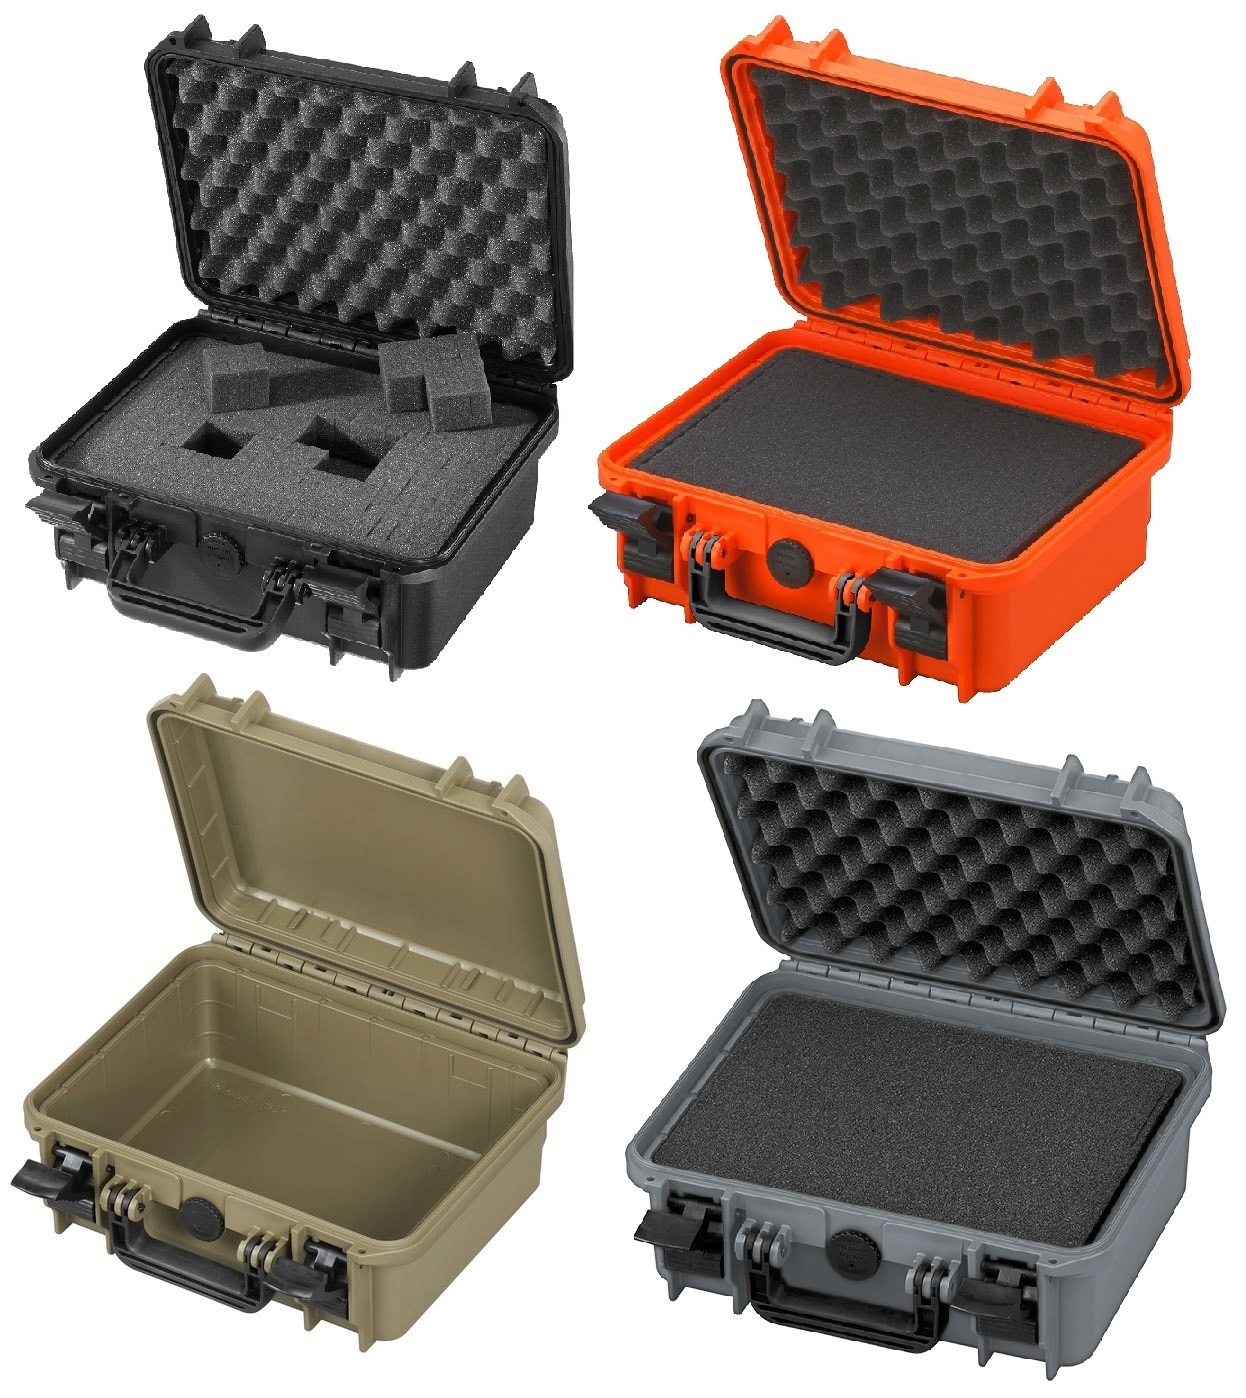 9 Litre IP67 Rated Waterproof Protective Case - With or Without Foam